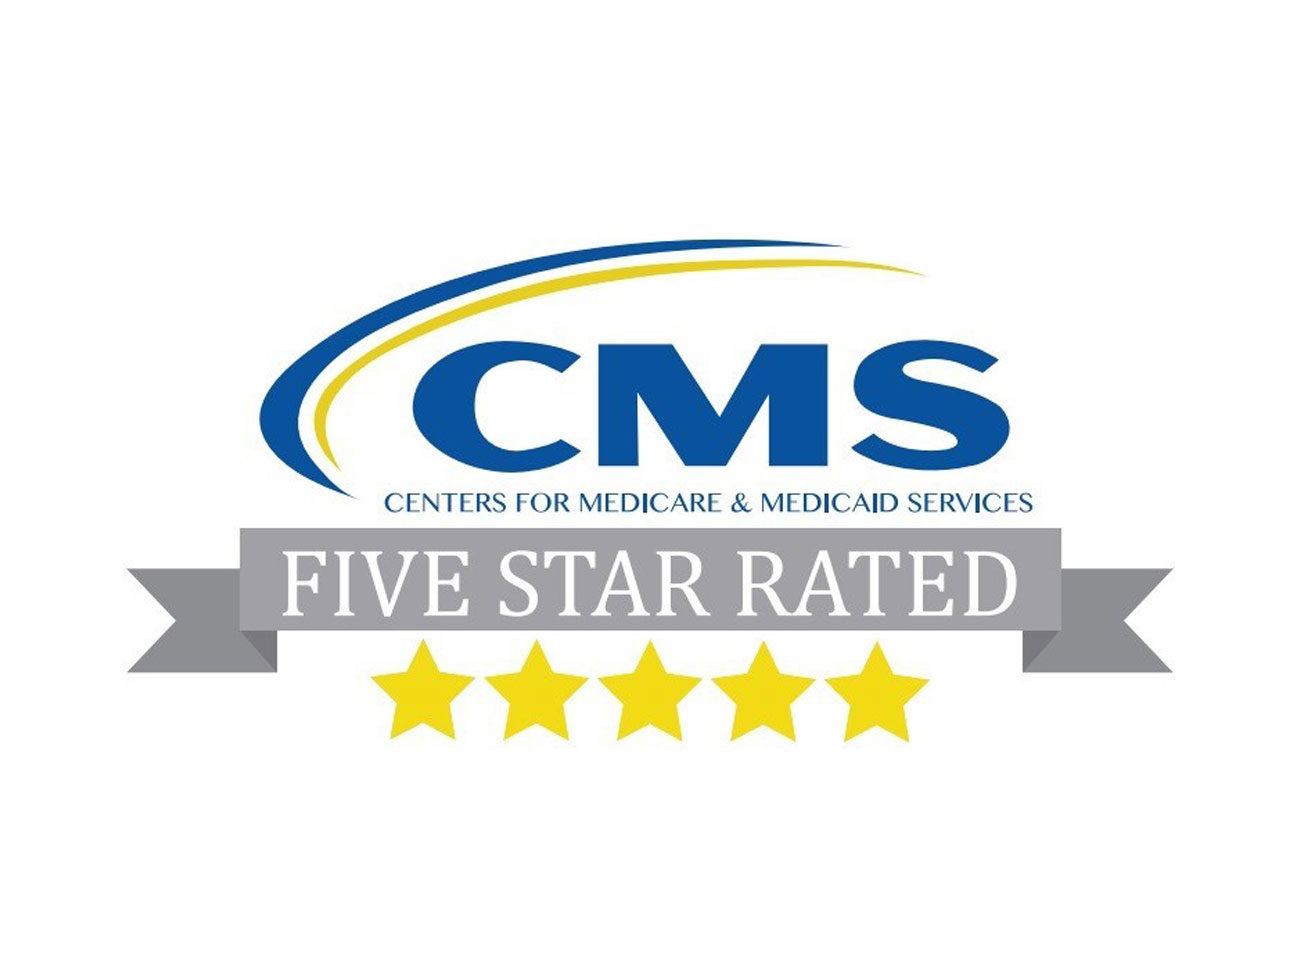 Centers for Medicare & Medicaid Services - Five Star Rated